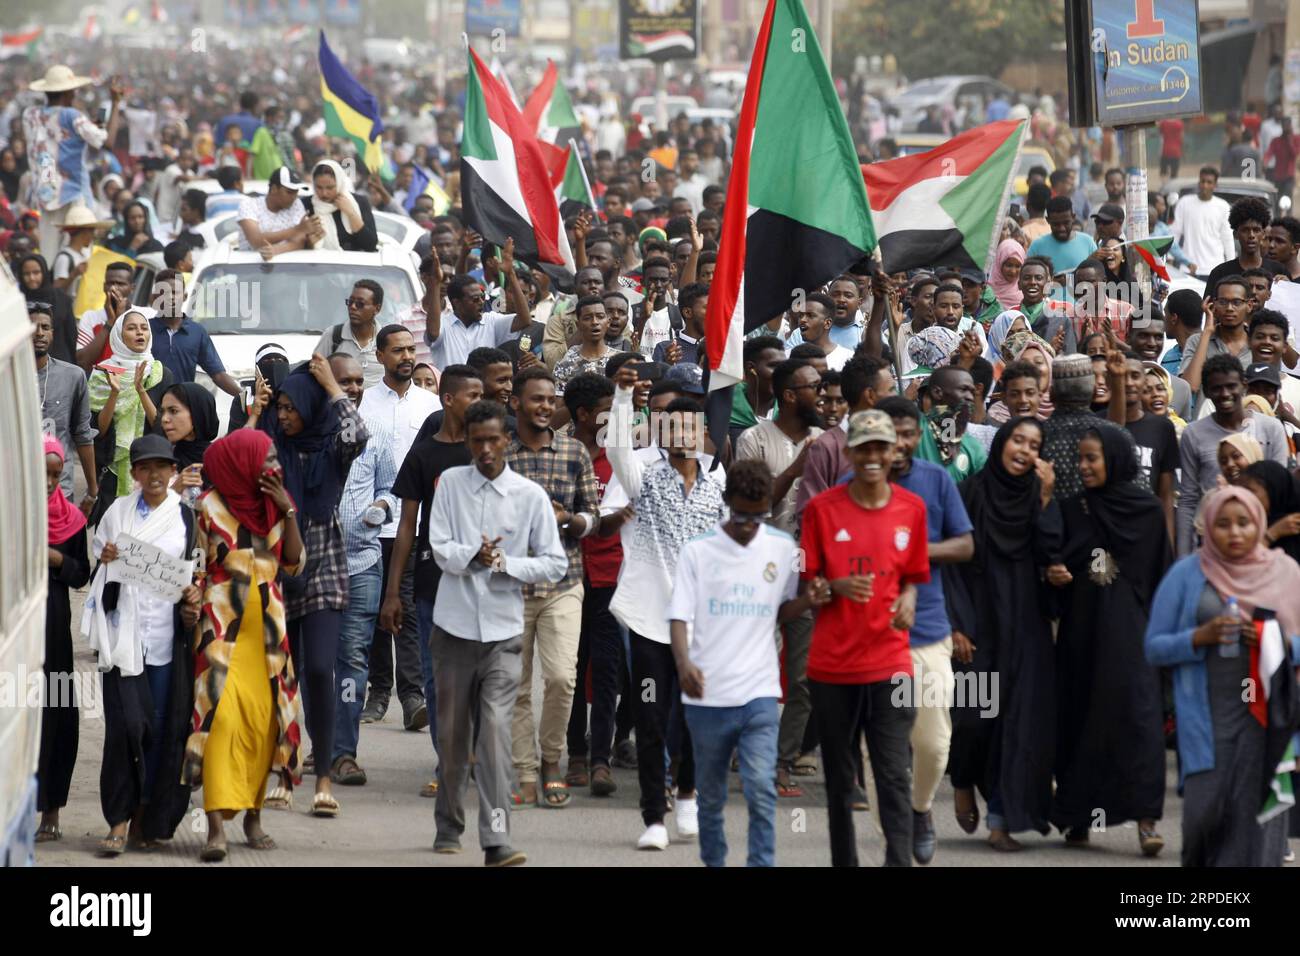 (190801) -- KHARTOUM, Aug. 1, 2019 -- Sudanese people take part in a demonstration in Khartoum, Sudan, on Aug. 1, 2019. Five people were killed and dozens of others injured during a shooting attack in El Obeid city on July 29. The incident sparked a wave of anger and widespread protests across Sudanese cities. (Photo by /Xinhua) SUDAN-KHARTOUM-DEMONSTRATION MohamedxKhidir PUBLICATIONxNOTxINxCHN Stock Photo